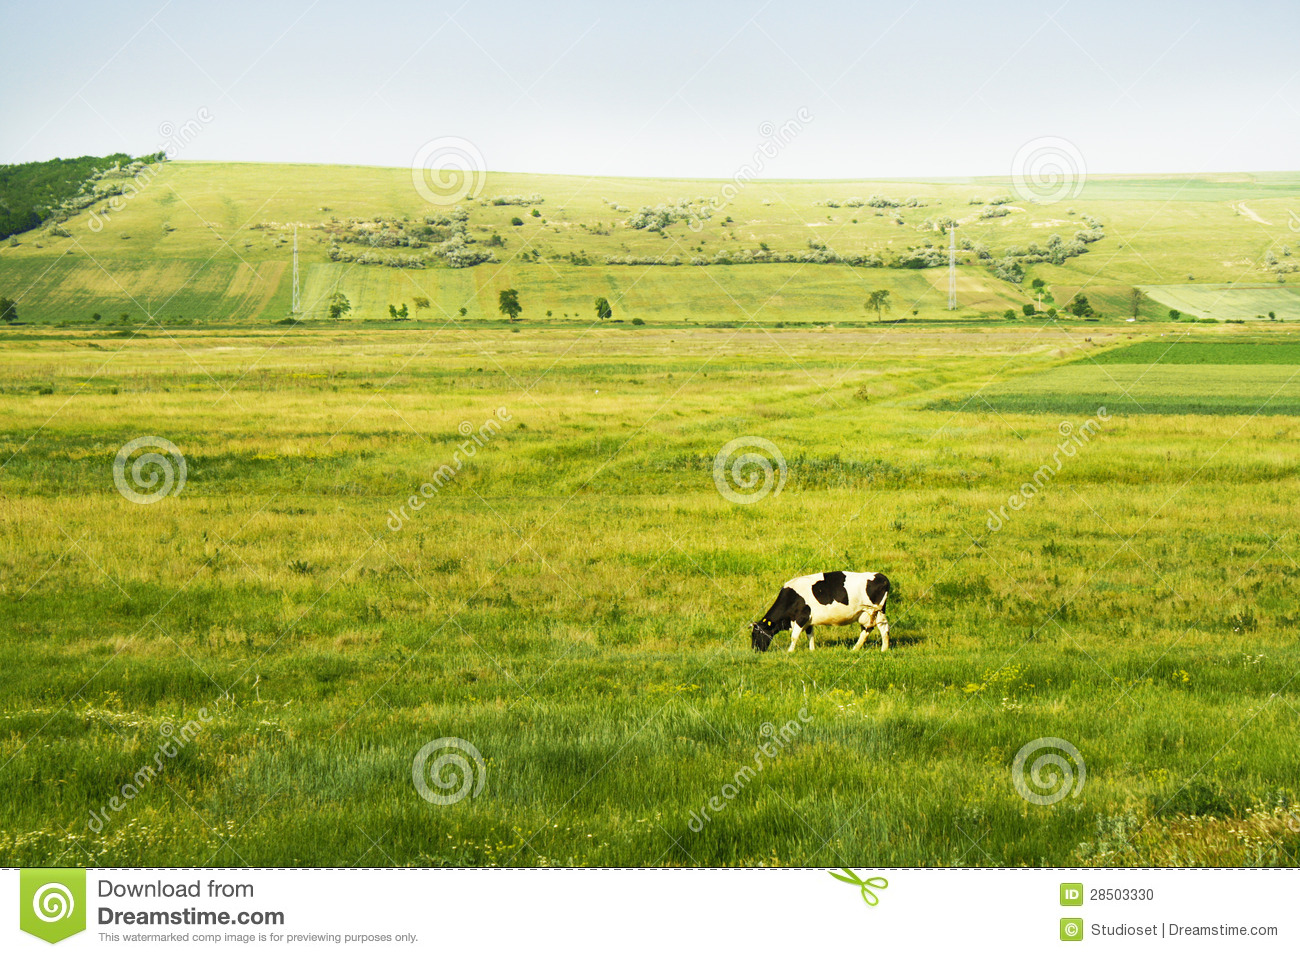 Cow In Field Stock Photo   Image  28503330